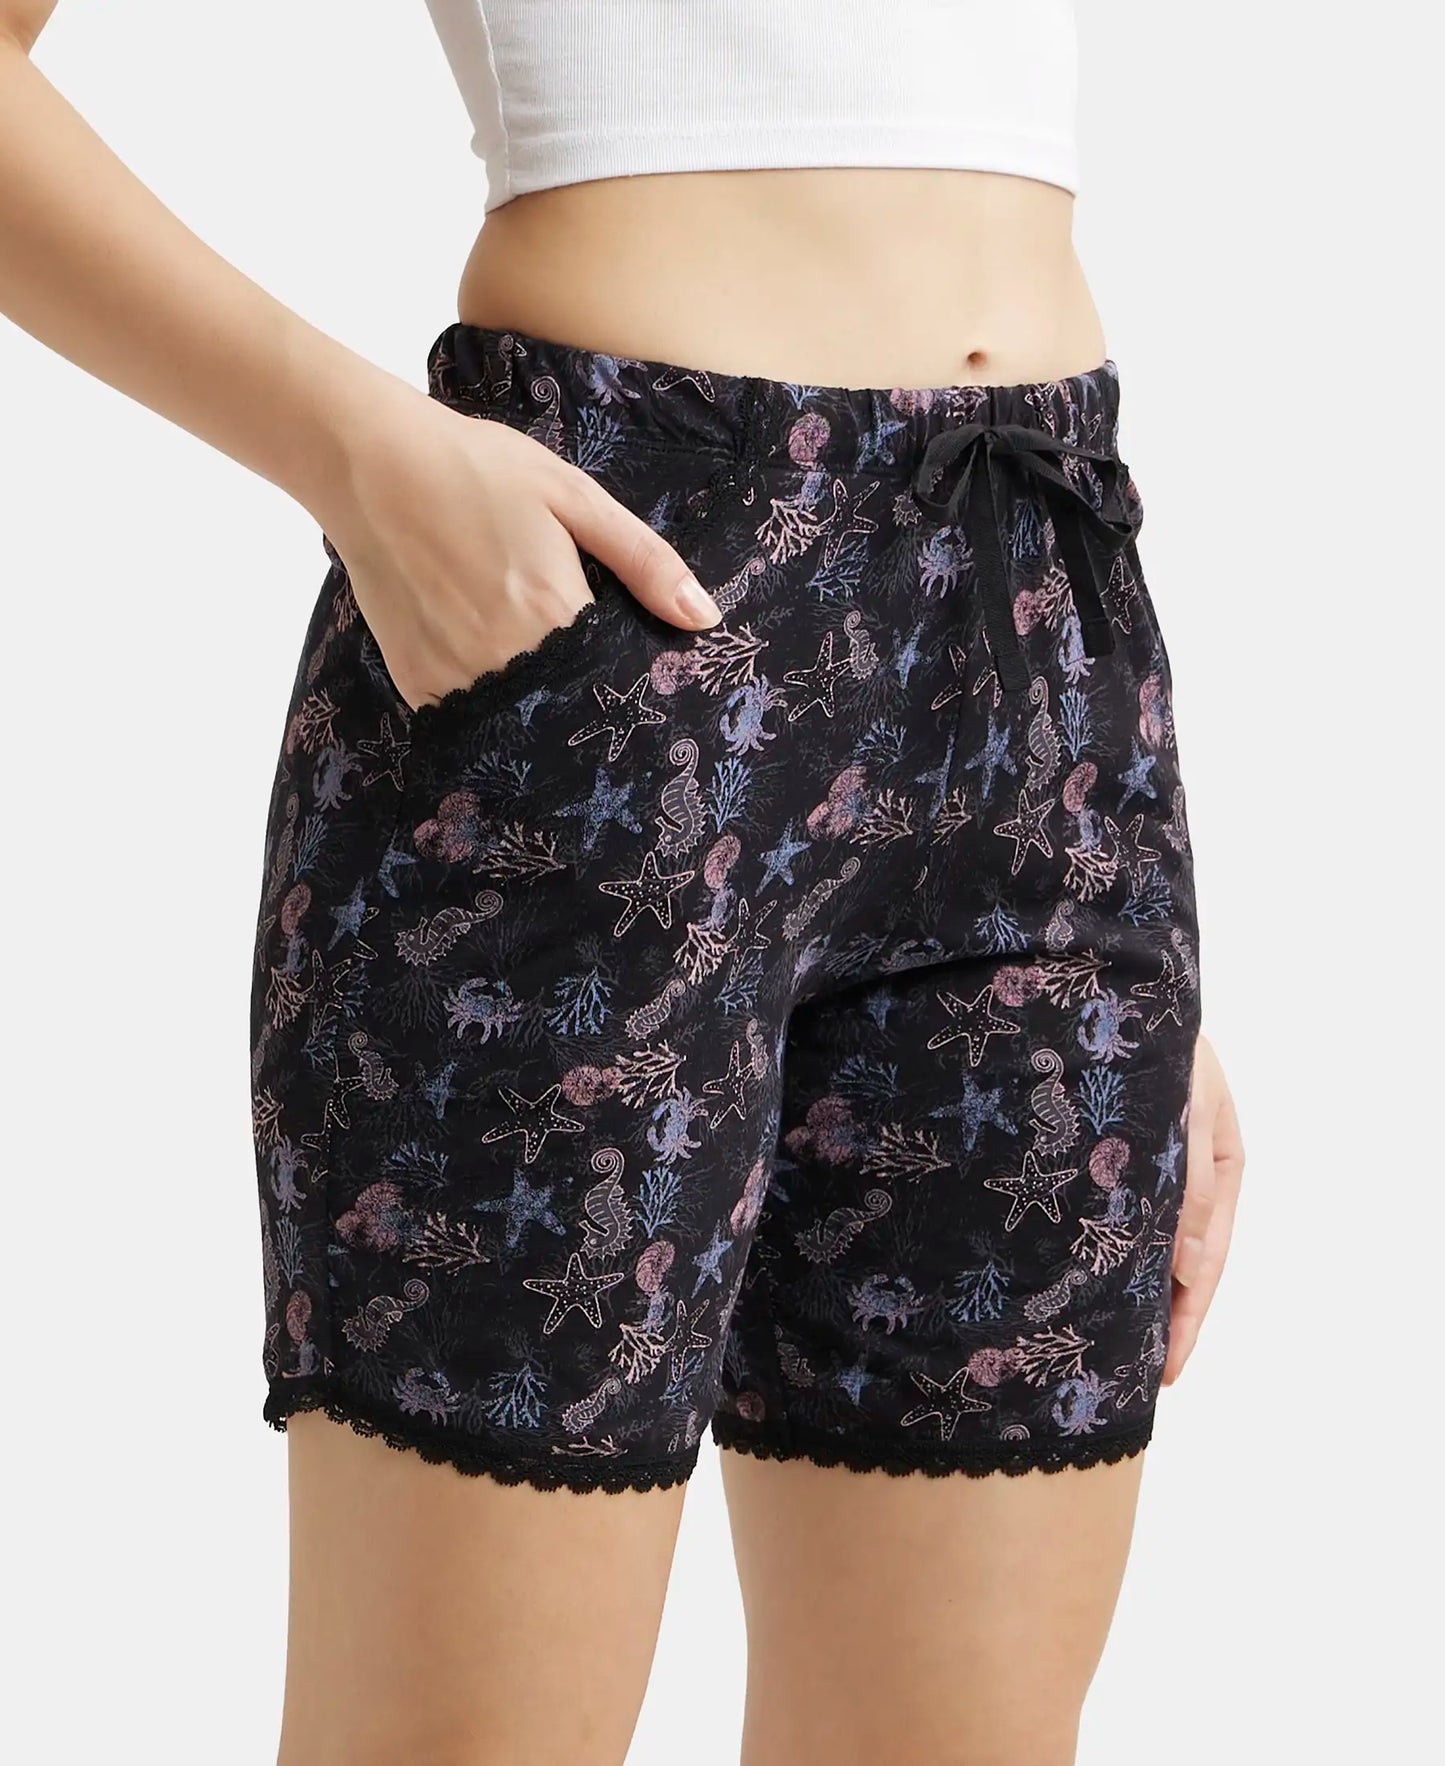 Micro Modal Cotton Relaxed Fit Printed Shorts with Side Pockets - Black-2